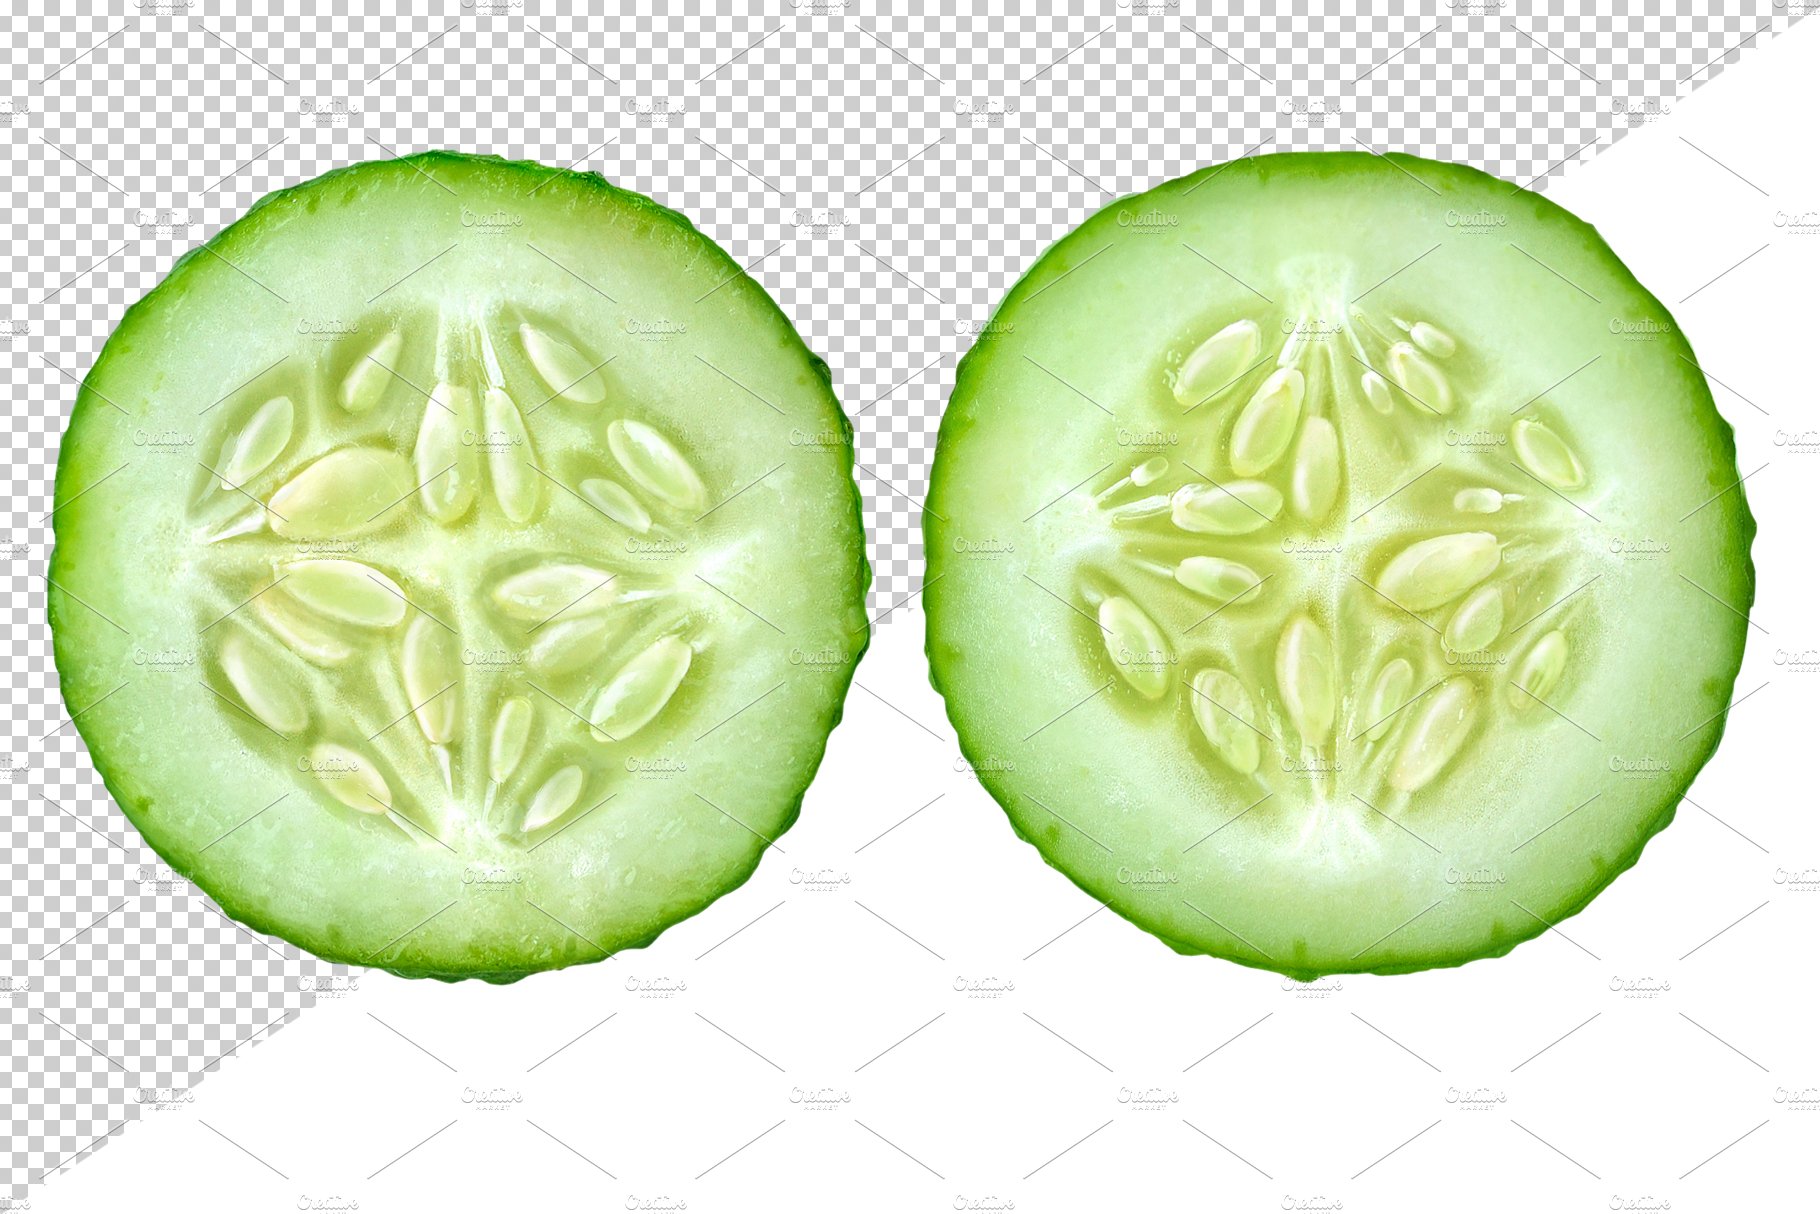 Cucumber pieces, leaves and flower preview image.